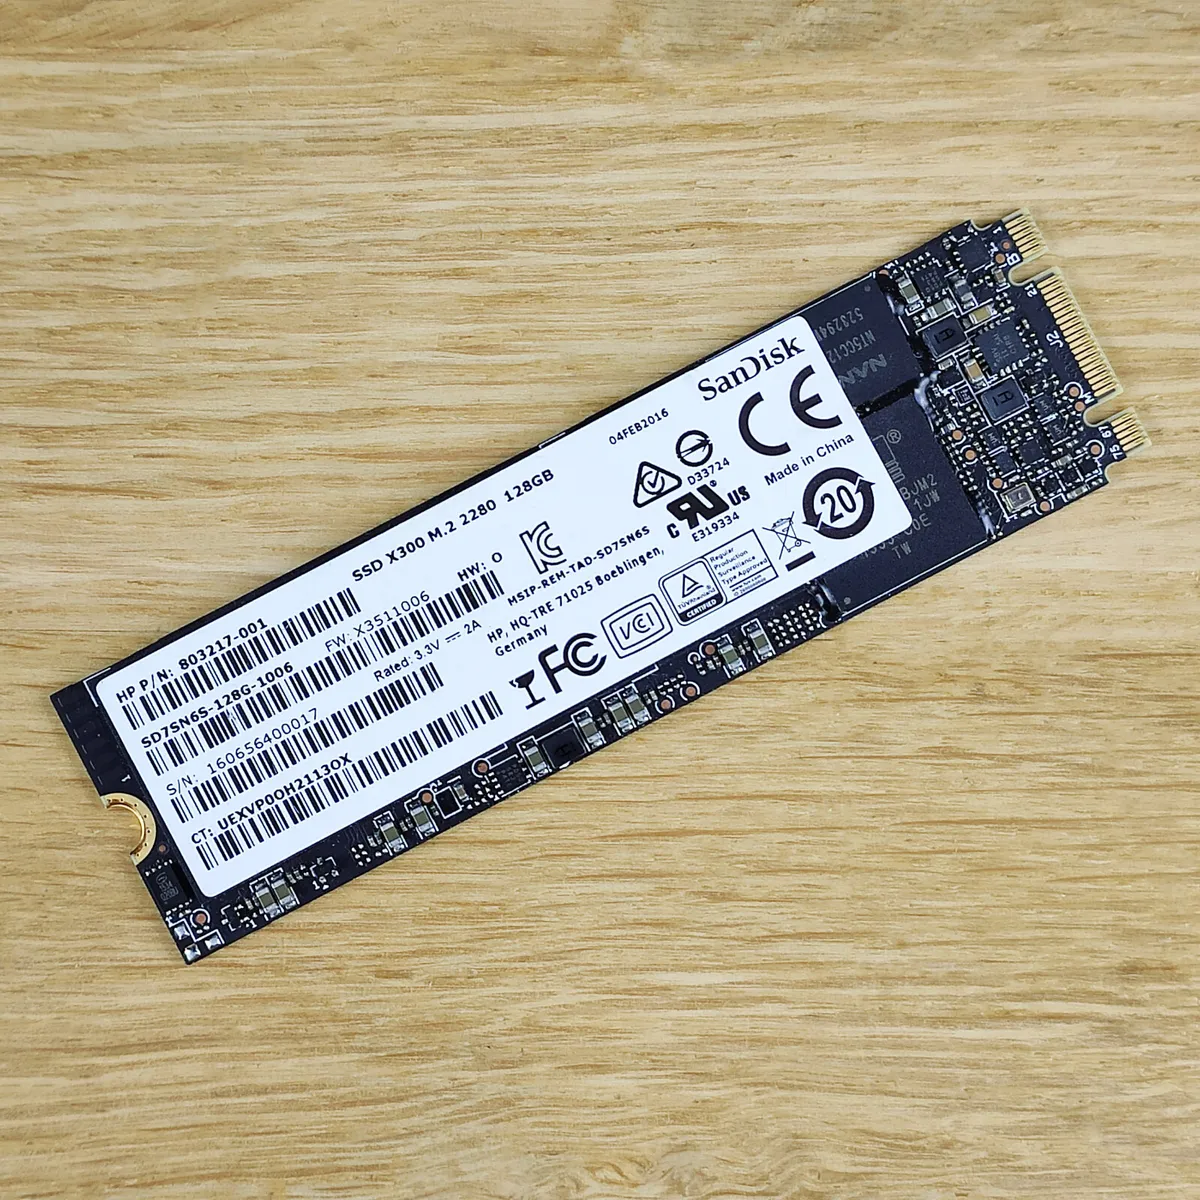 What Is 128GB SSD Mean